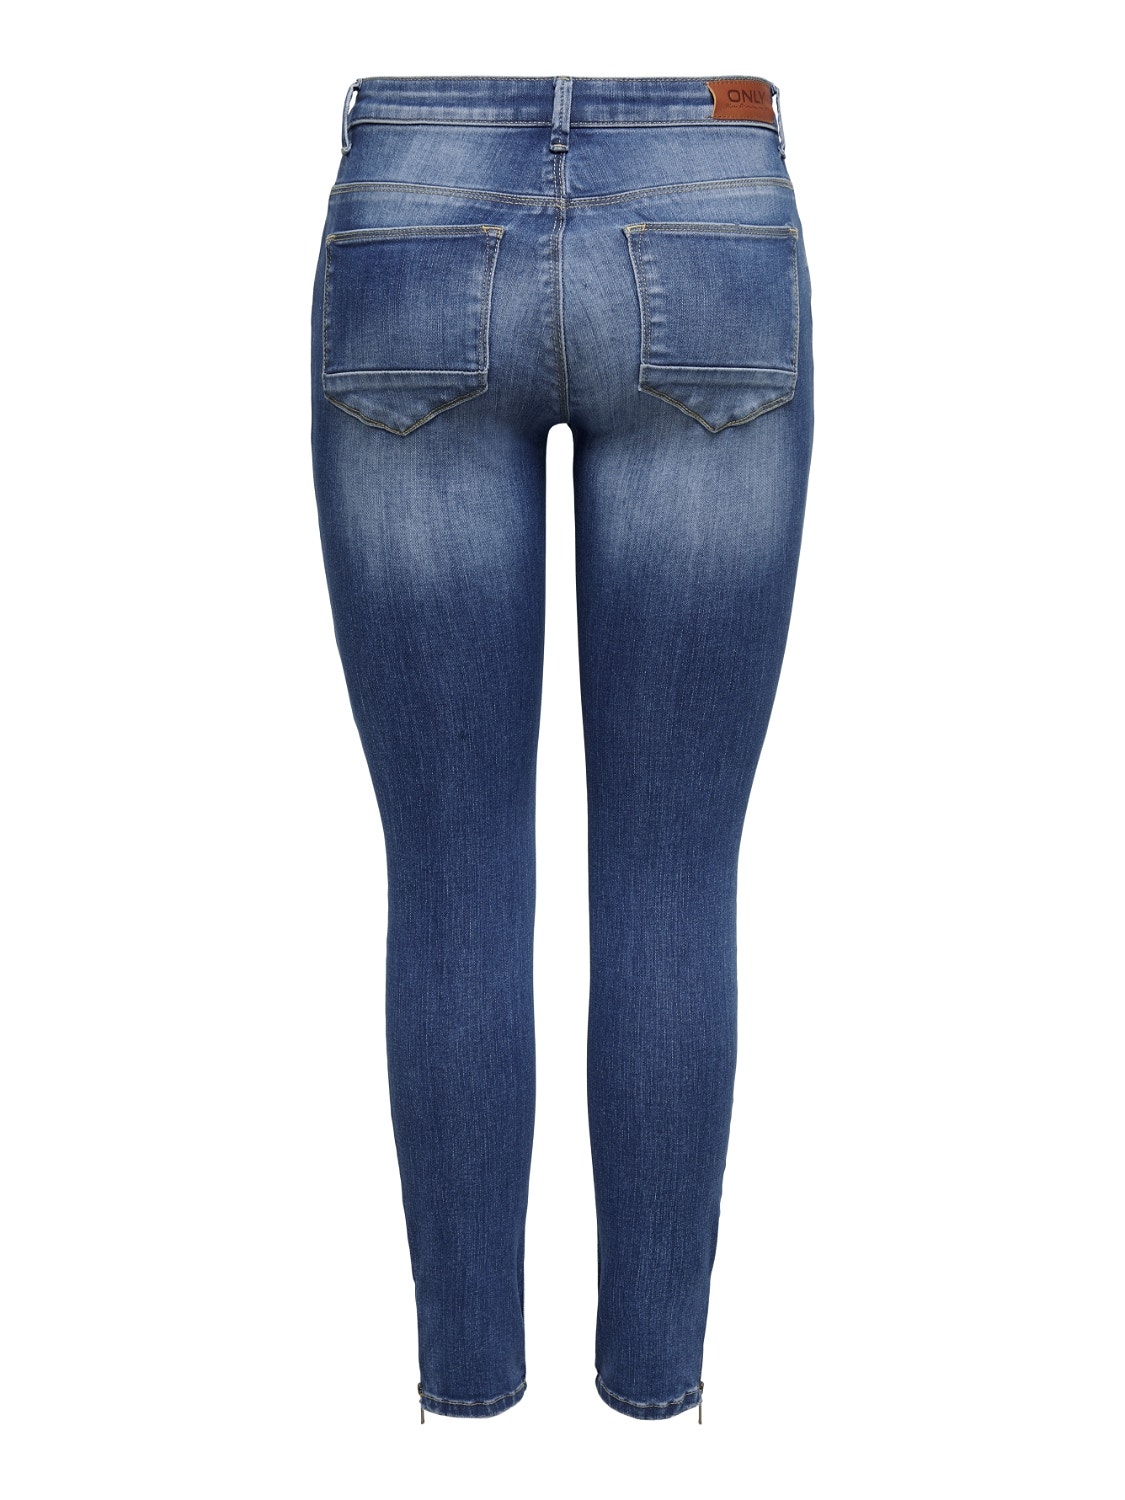 ONLY Jeans Skinny Fit Taille classique -Medium Blue Denim - 15251364